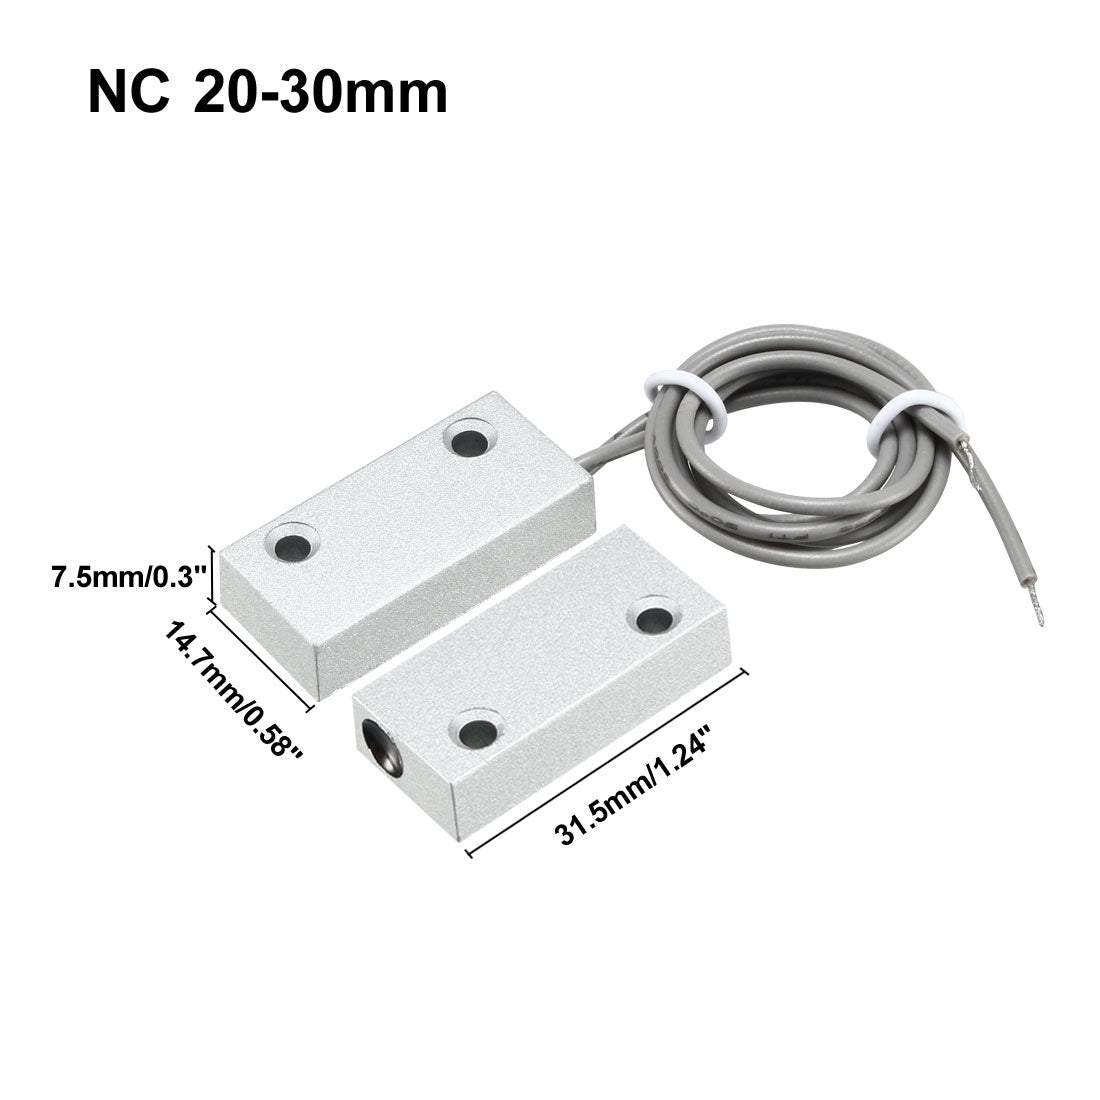 uxcell Uxcell 3pcs MC-51 NC Alarm Security Rolling Gate Garage Door Contact Magnetic Reed Switch Silver Gray